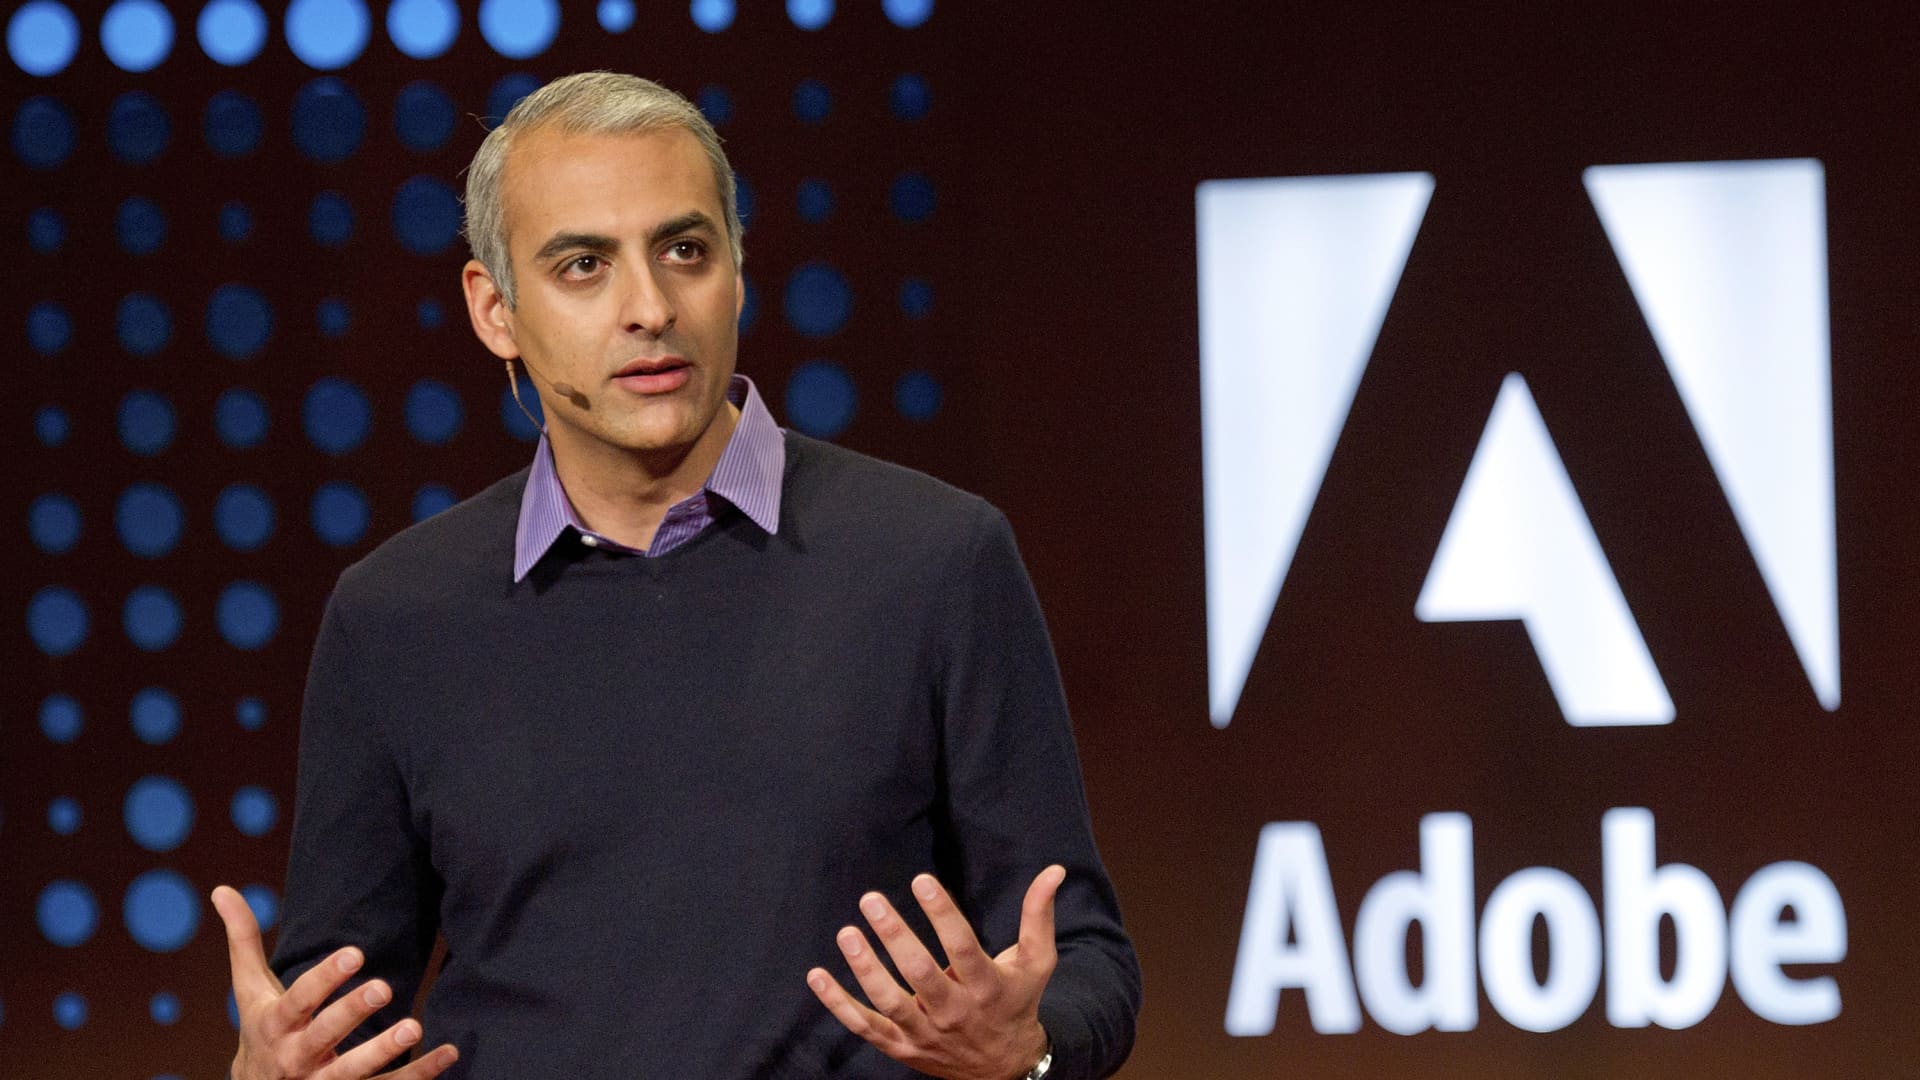 Adobe and Figma call off $20 billion merger